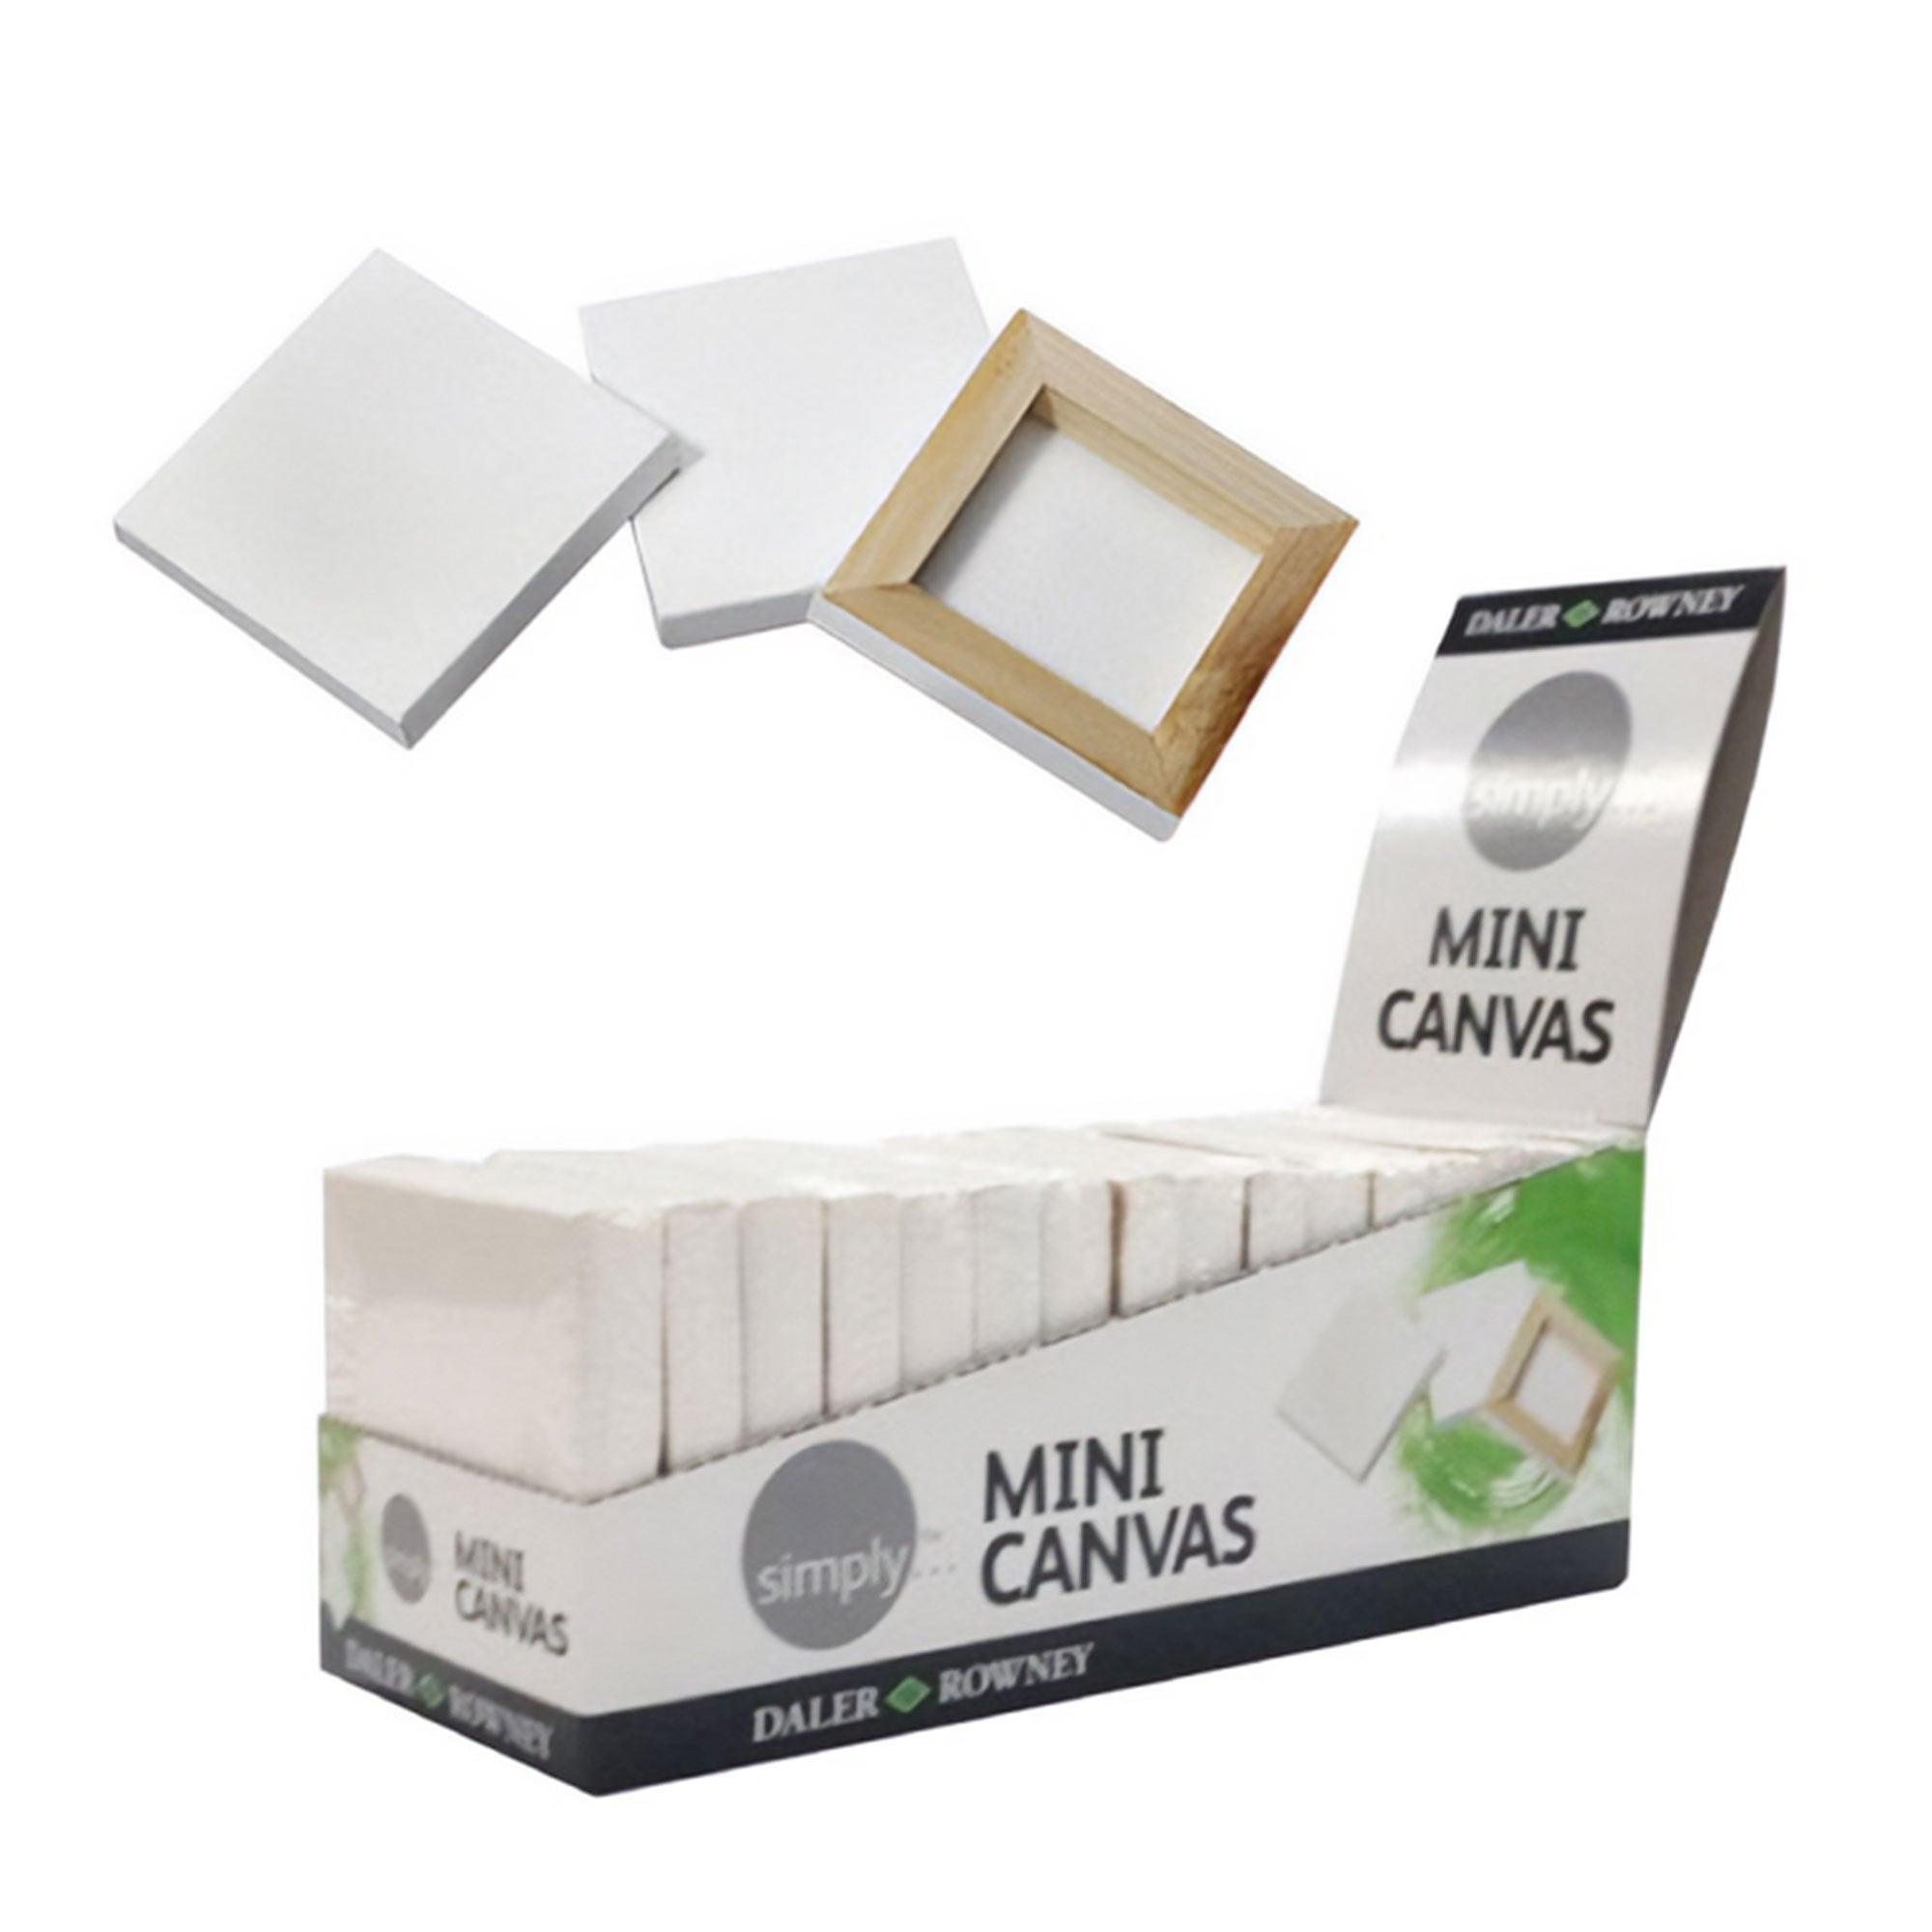 Daler-Rowney Mini Canvas Squares - 2.5x2.5" (6.35cm approx.) - Pack of 16